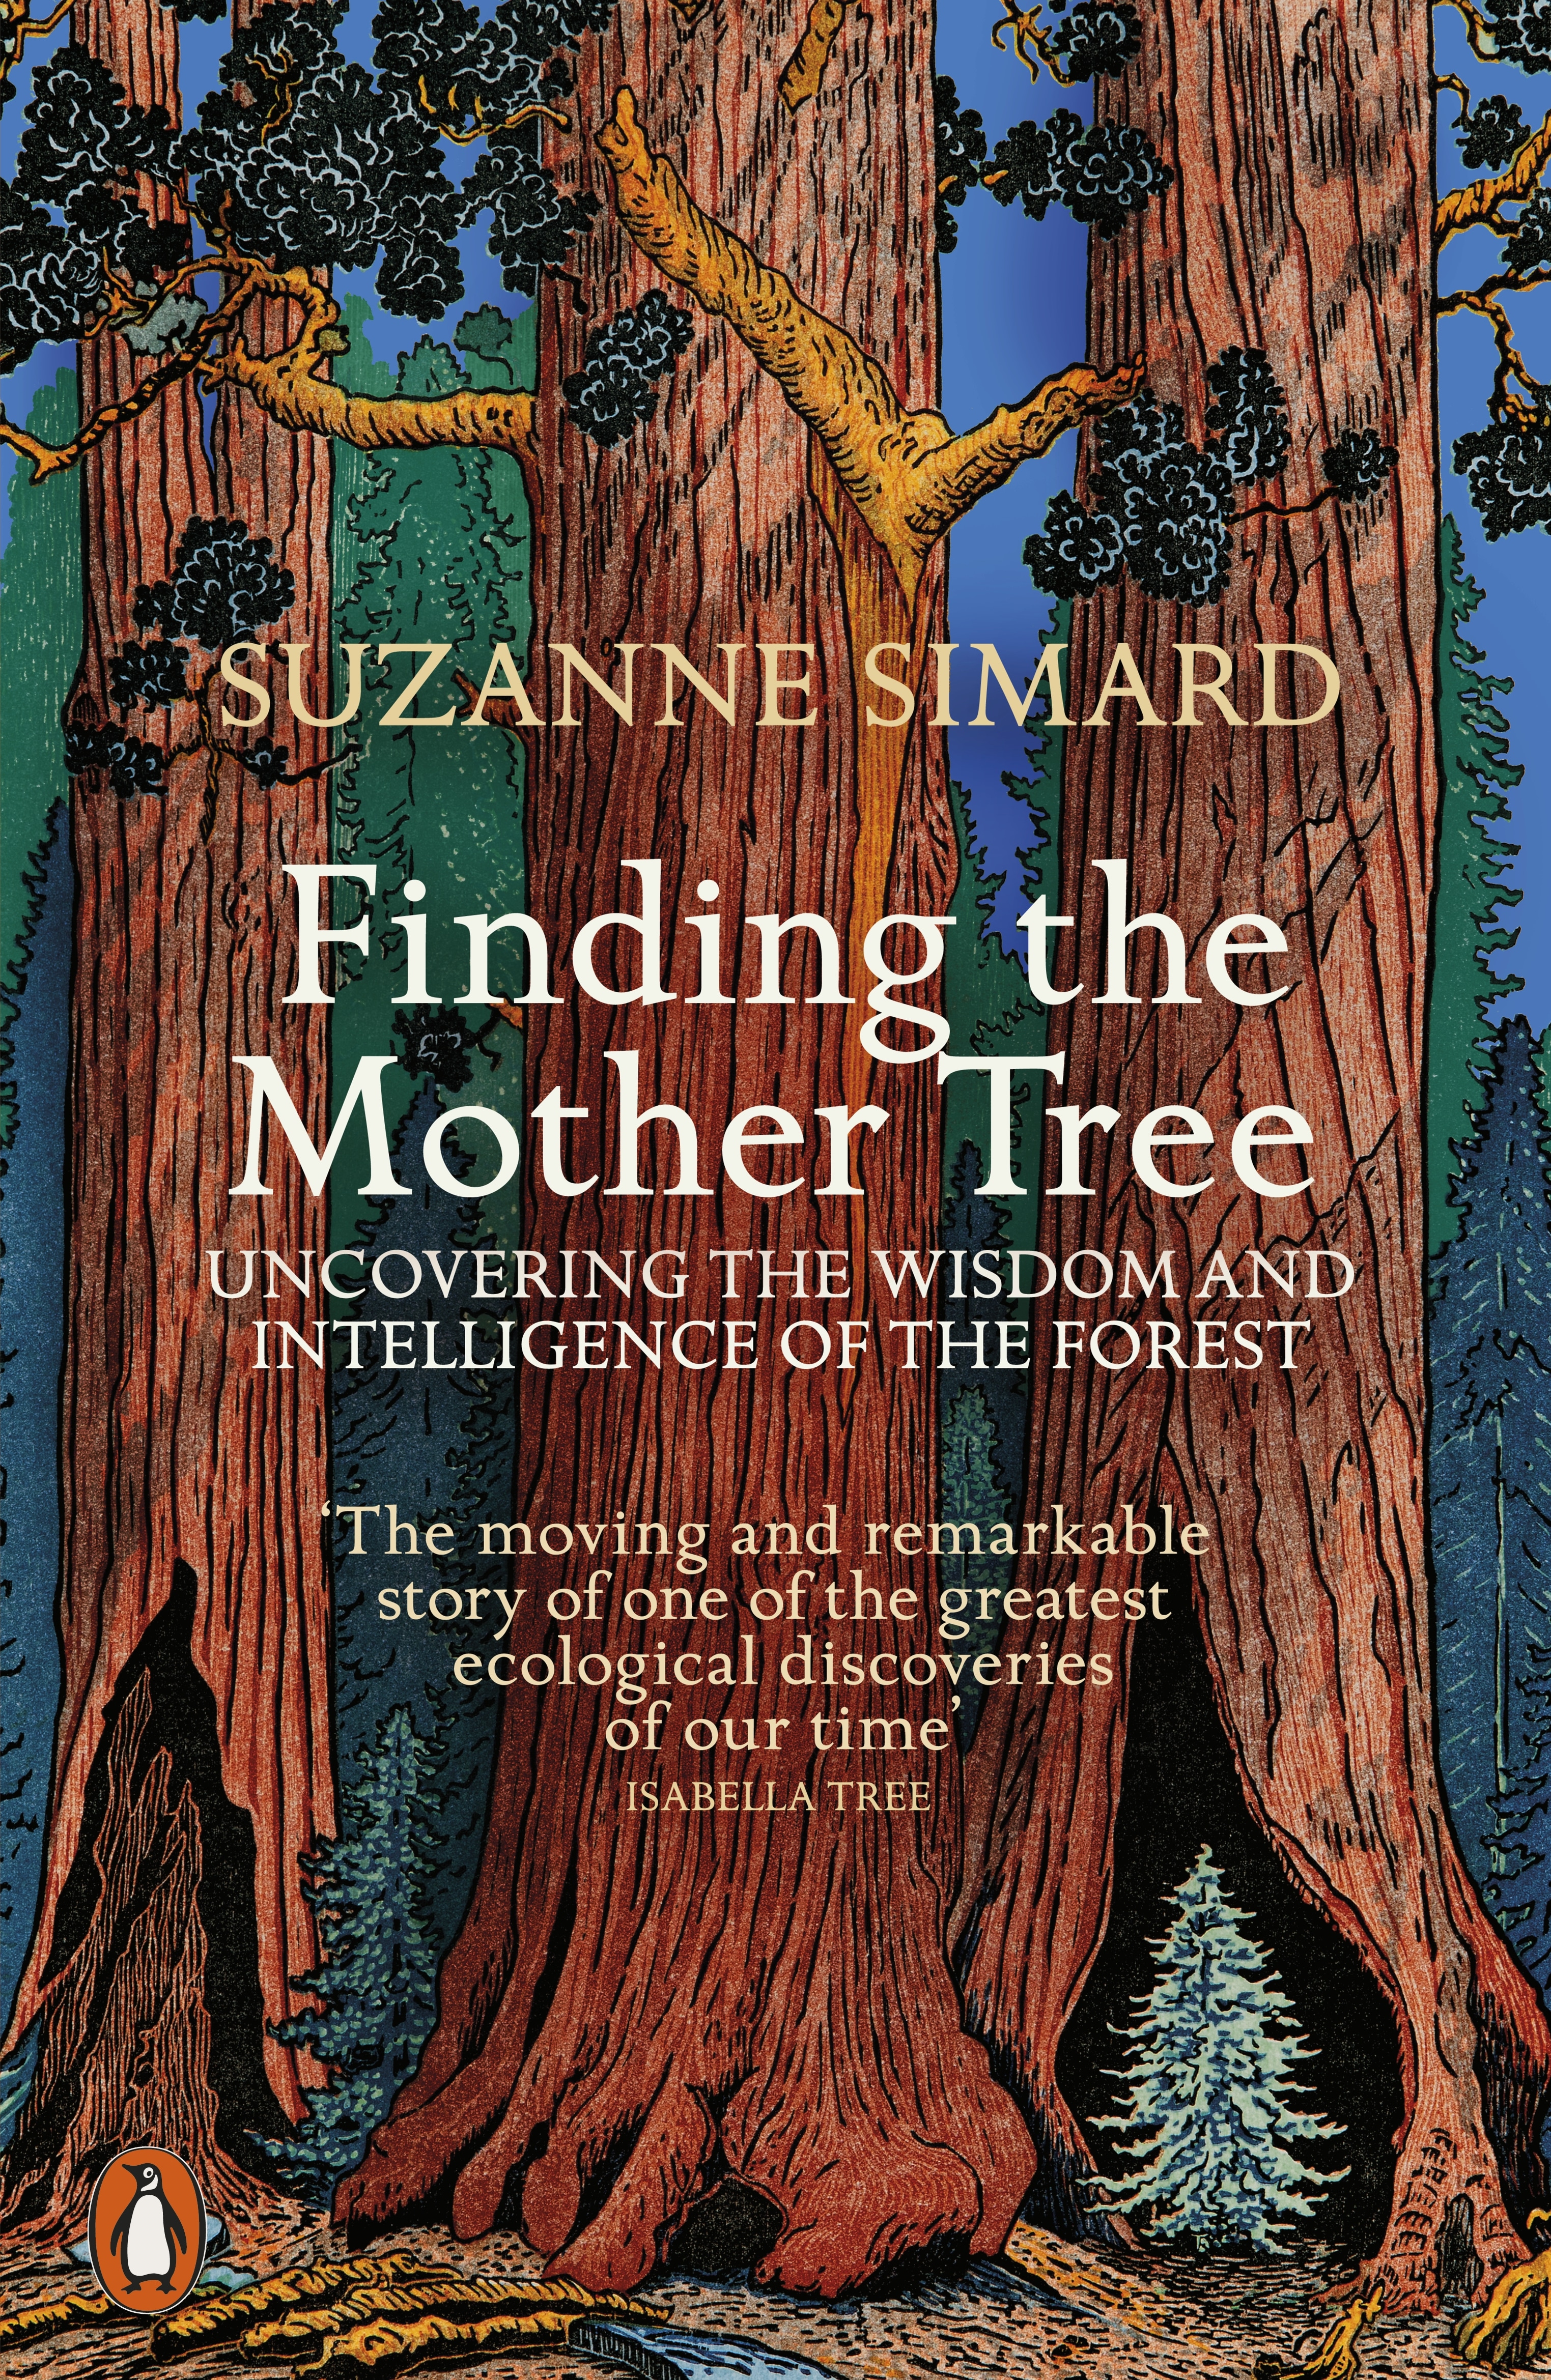 Book “Finding the Mother Tree” by Suzanne Simard — March 3, 2022